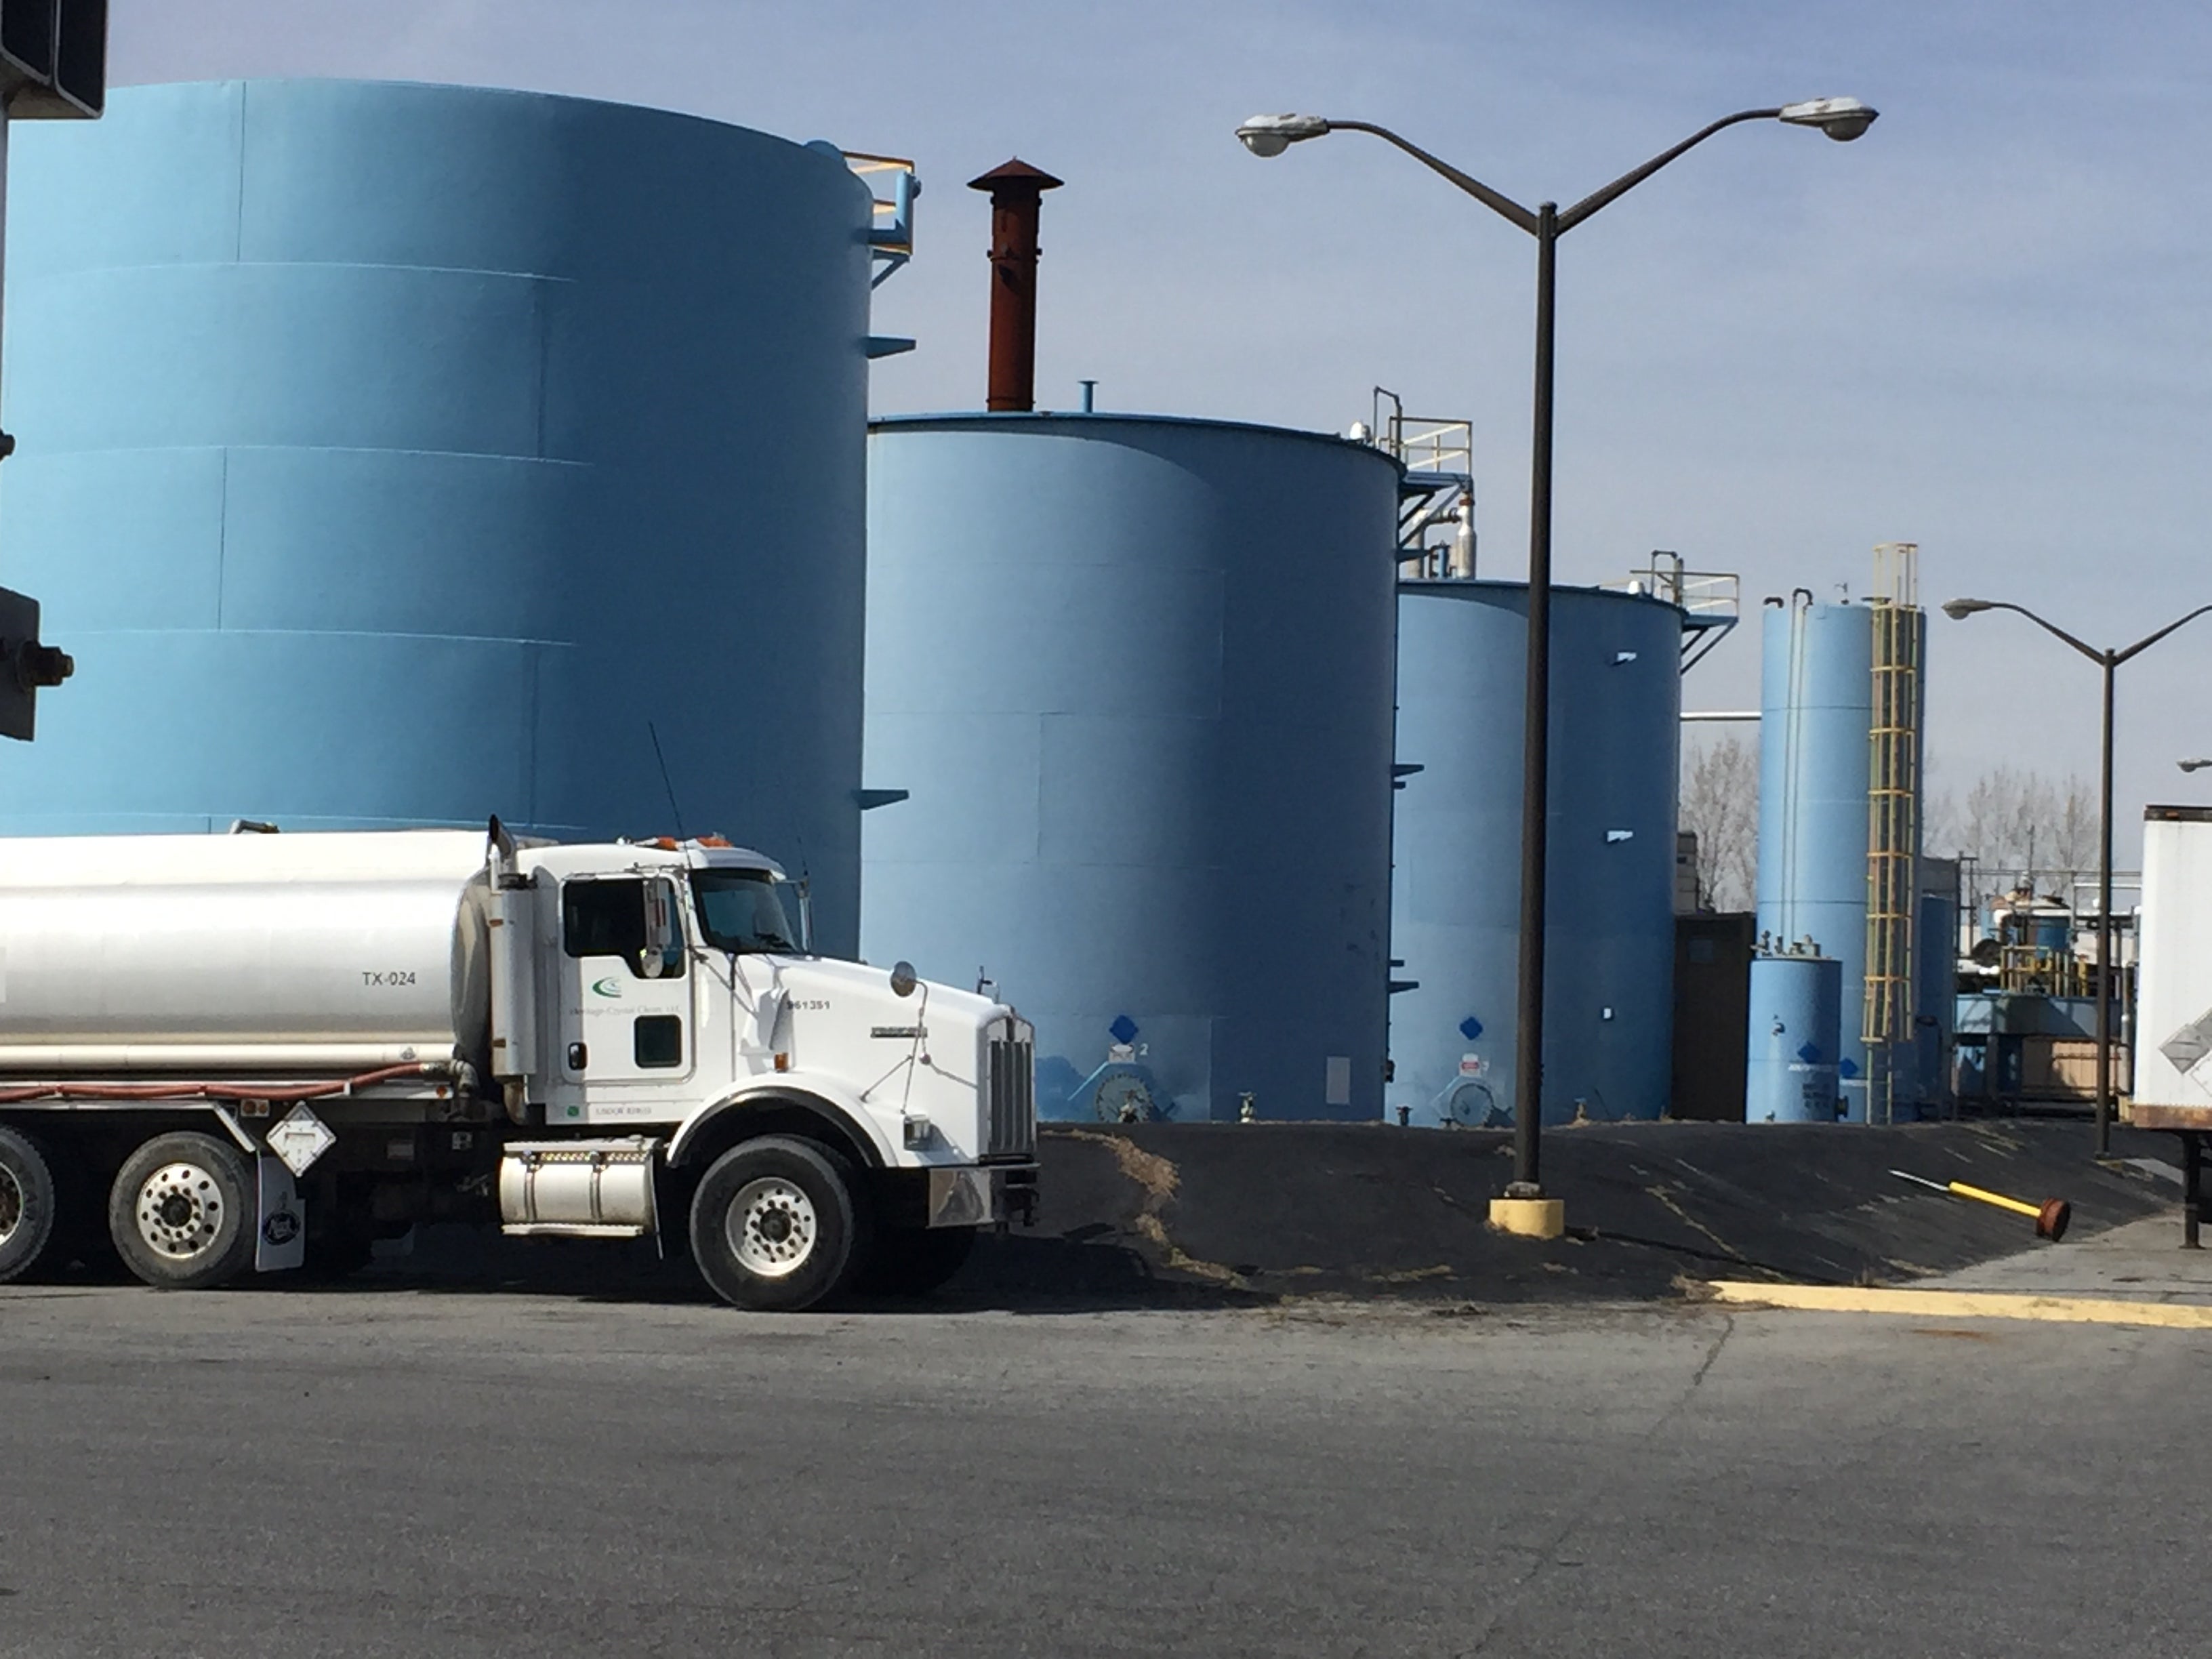  Delaware environmental regulators issued a cease and desist order Monday against the former International Petroleum Corp.' facility in Wilmington for transporting hazardous wastes. (Cris Barrish/WHYY) 